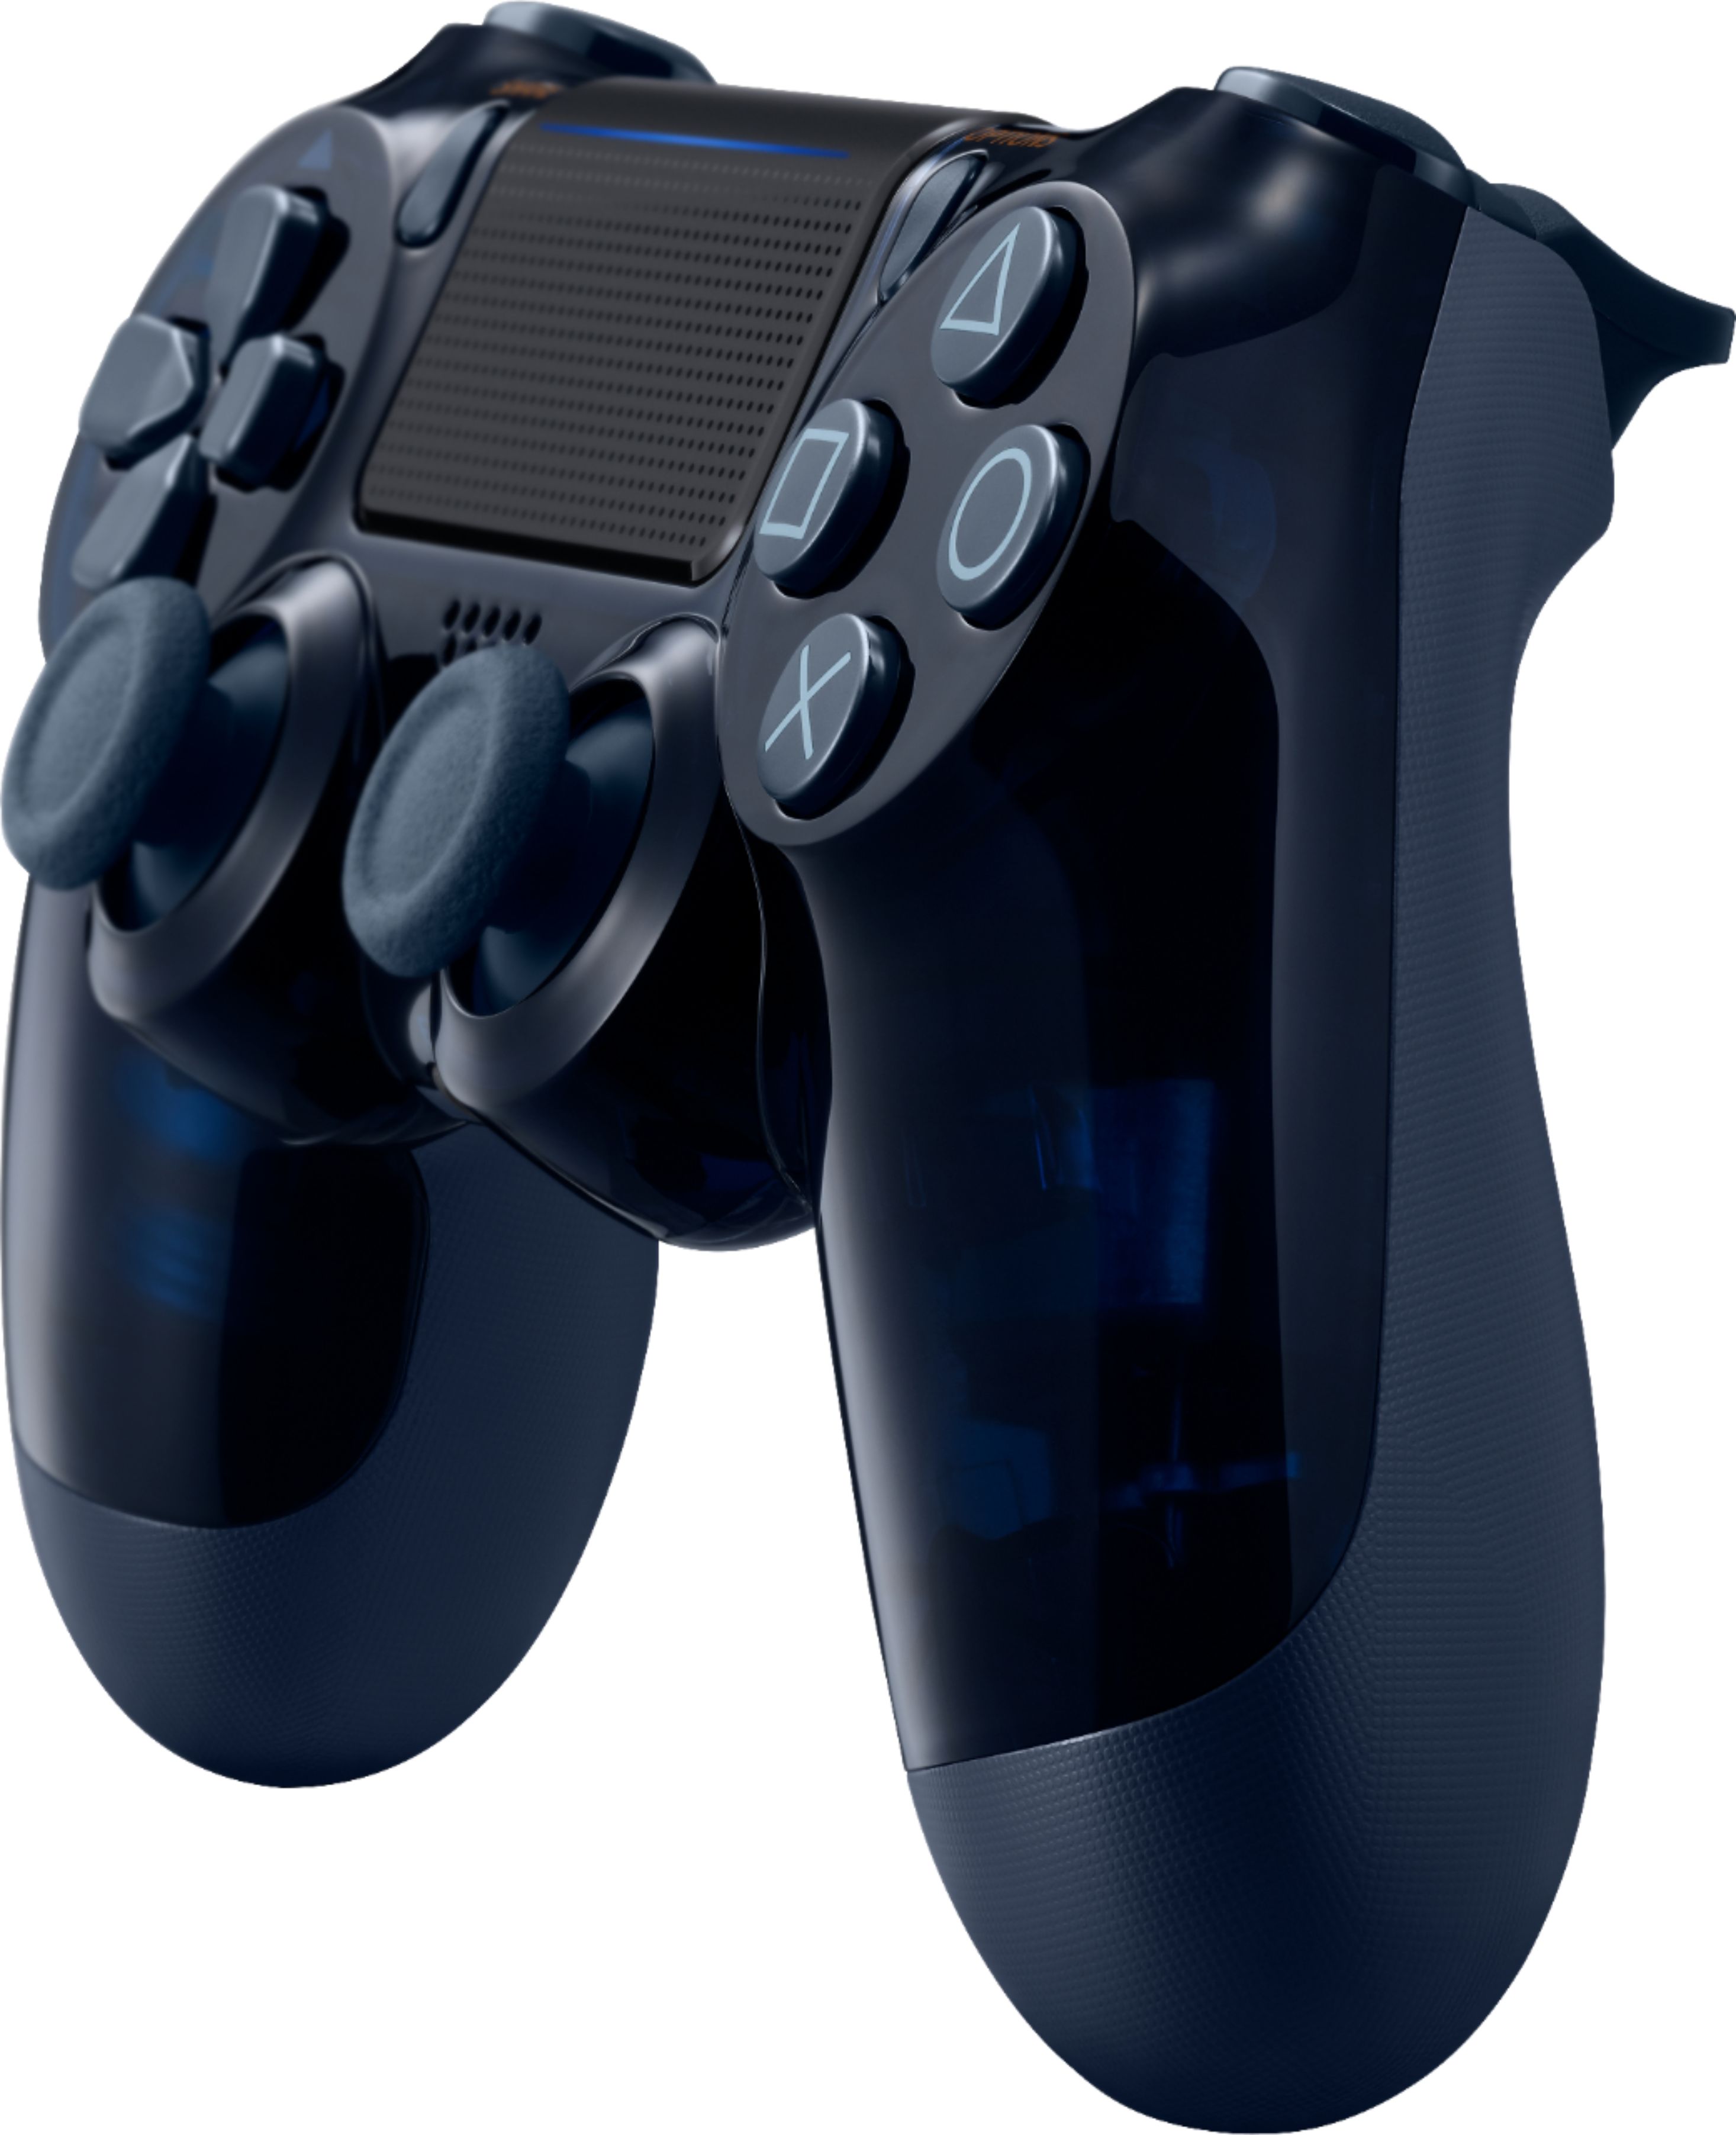 500 million edition ps4 controller